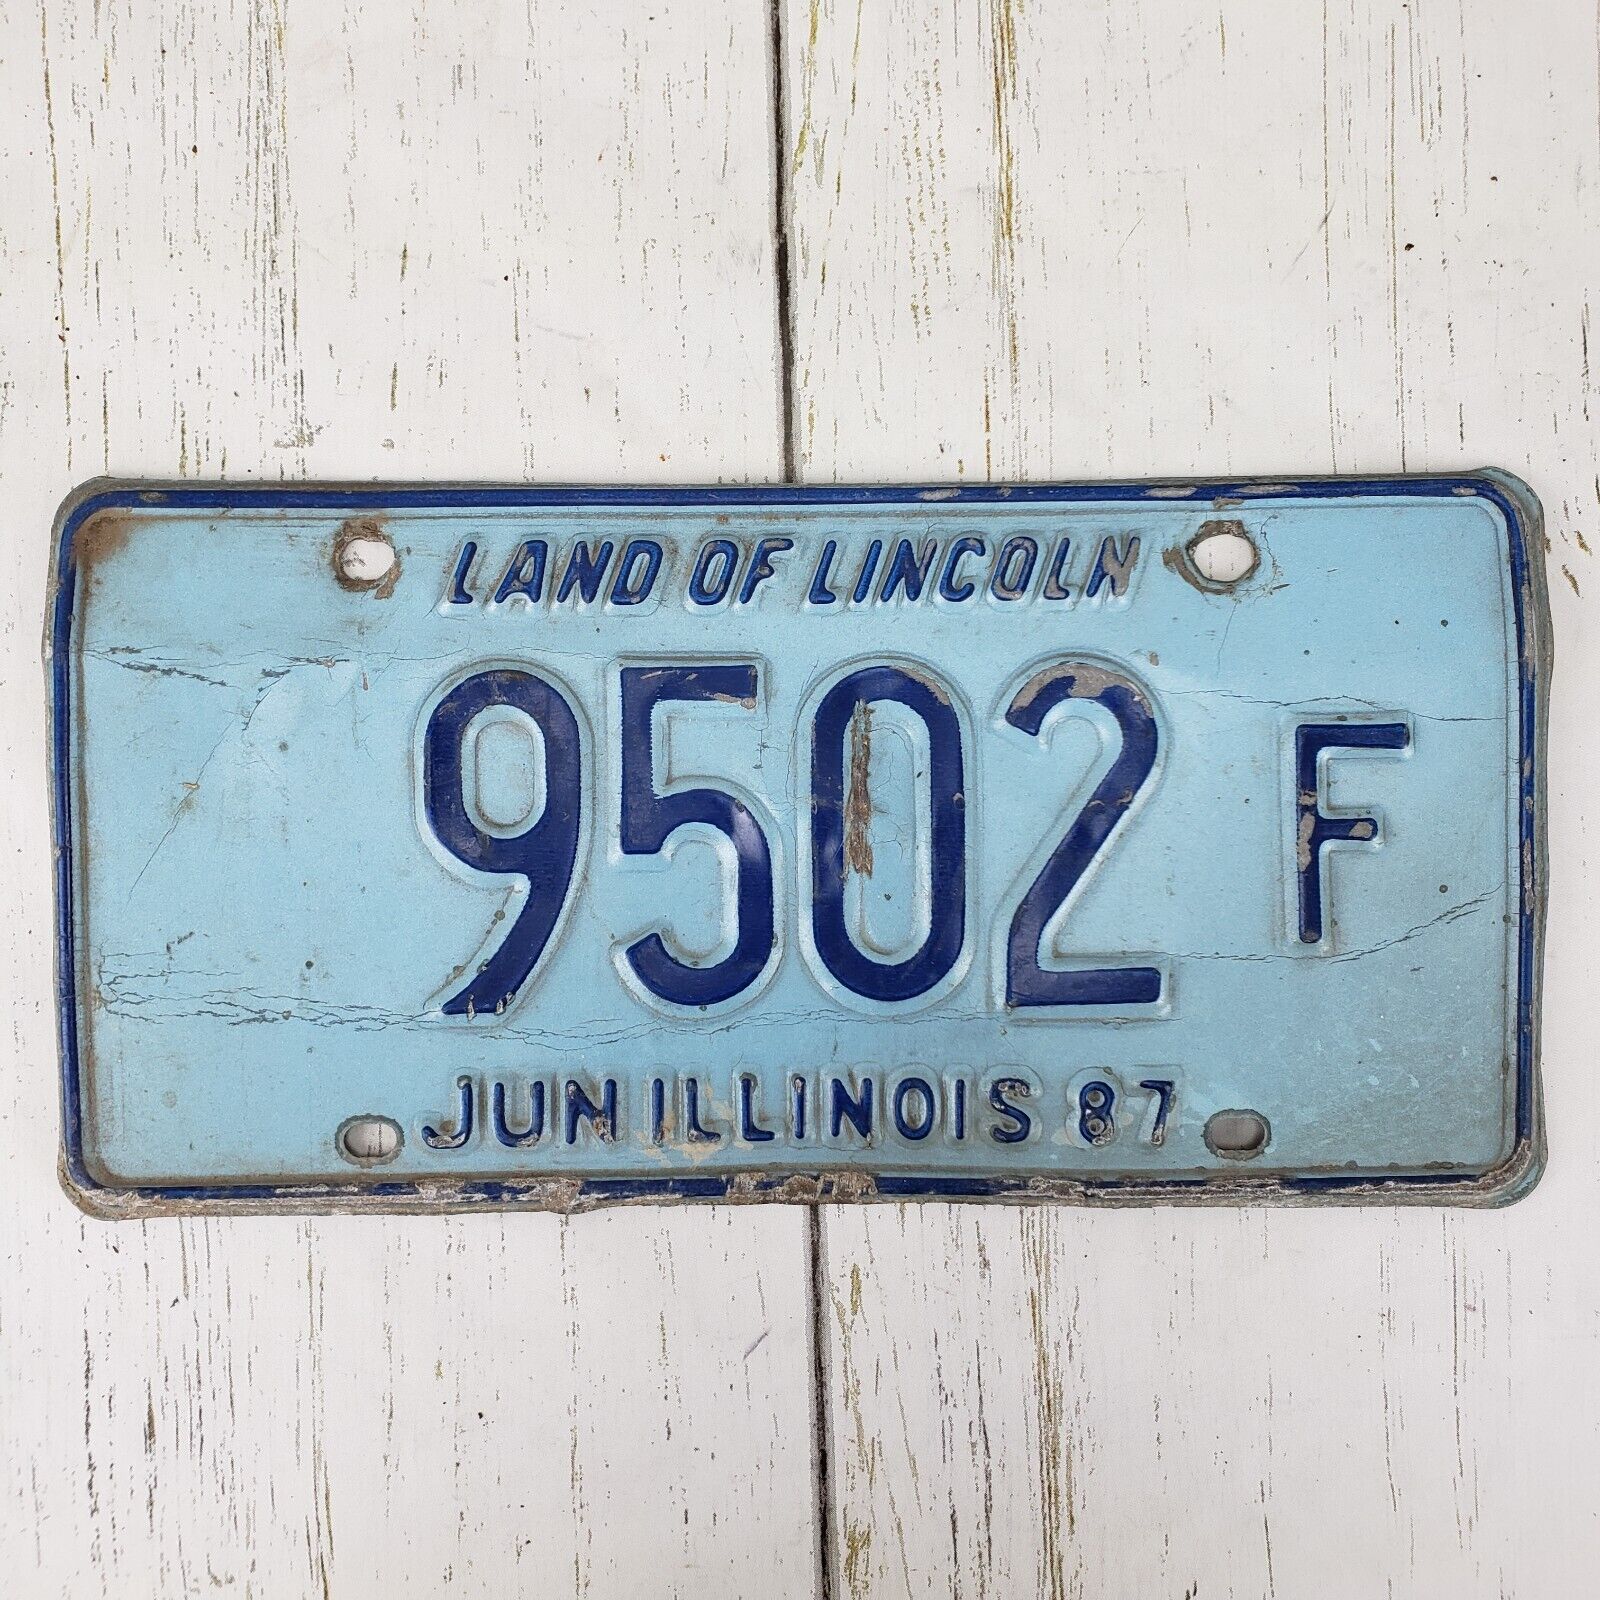 Illinois Expired 1987 Light Blue Land of Lincoln License Plate #9502 F